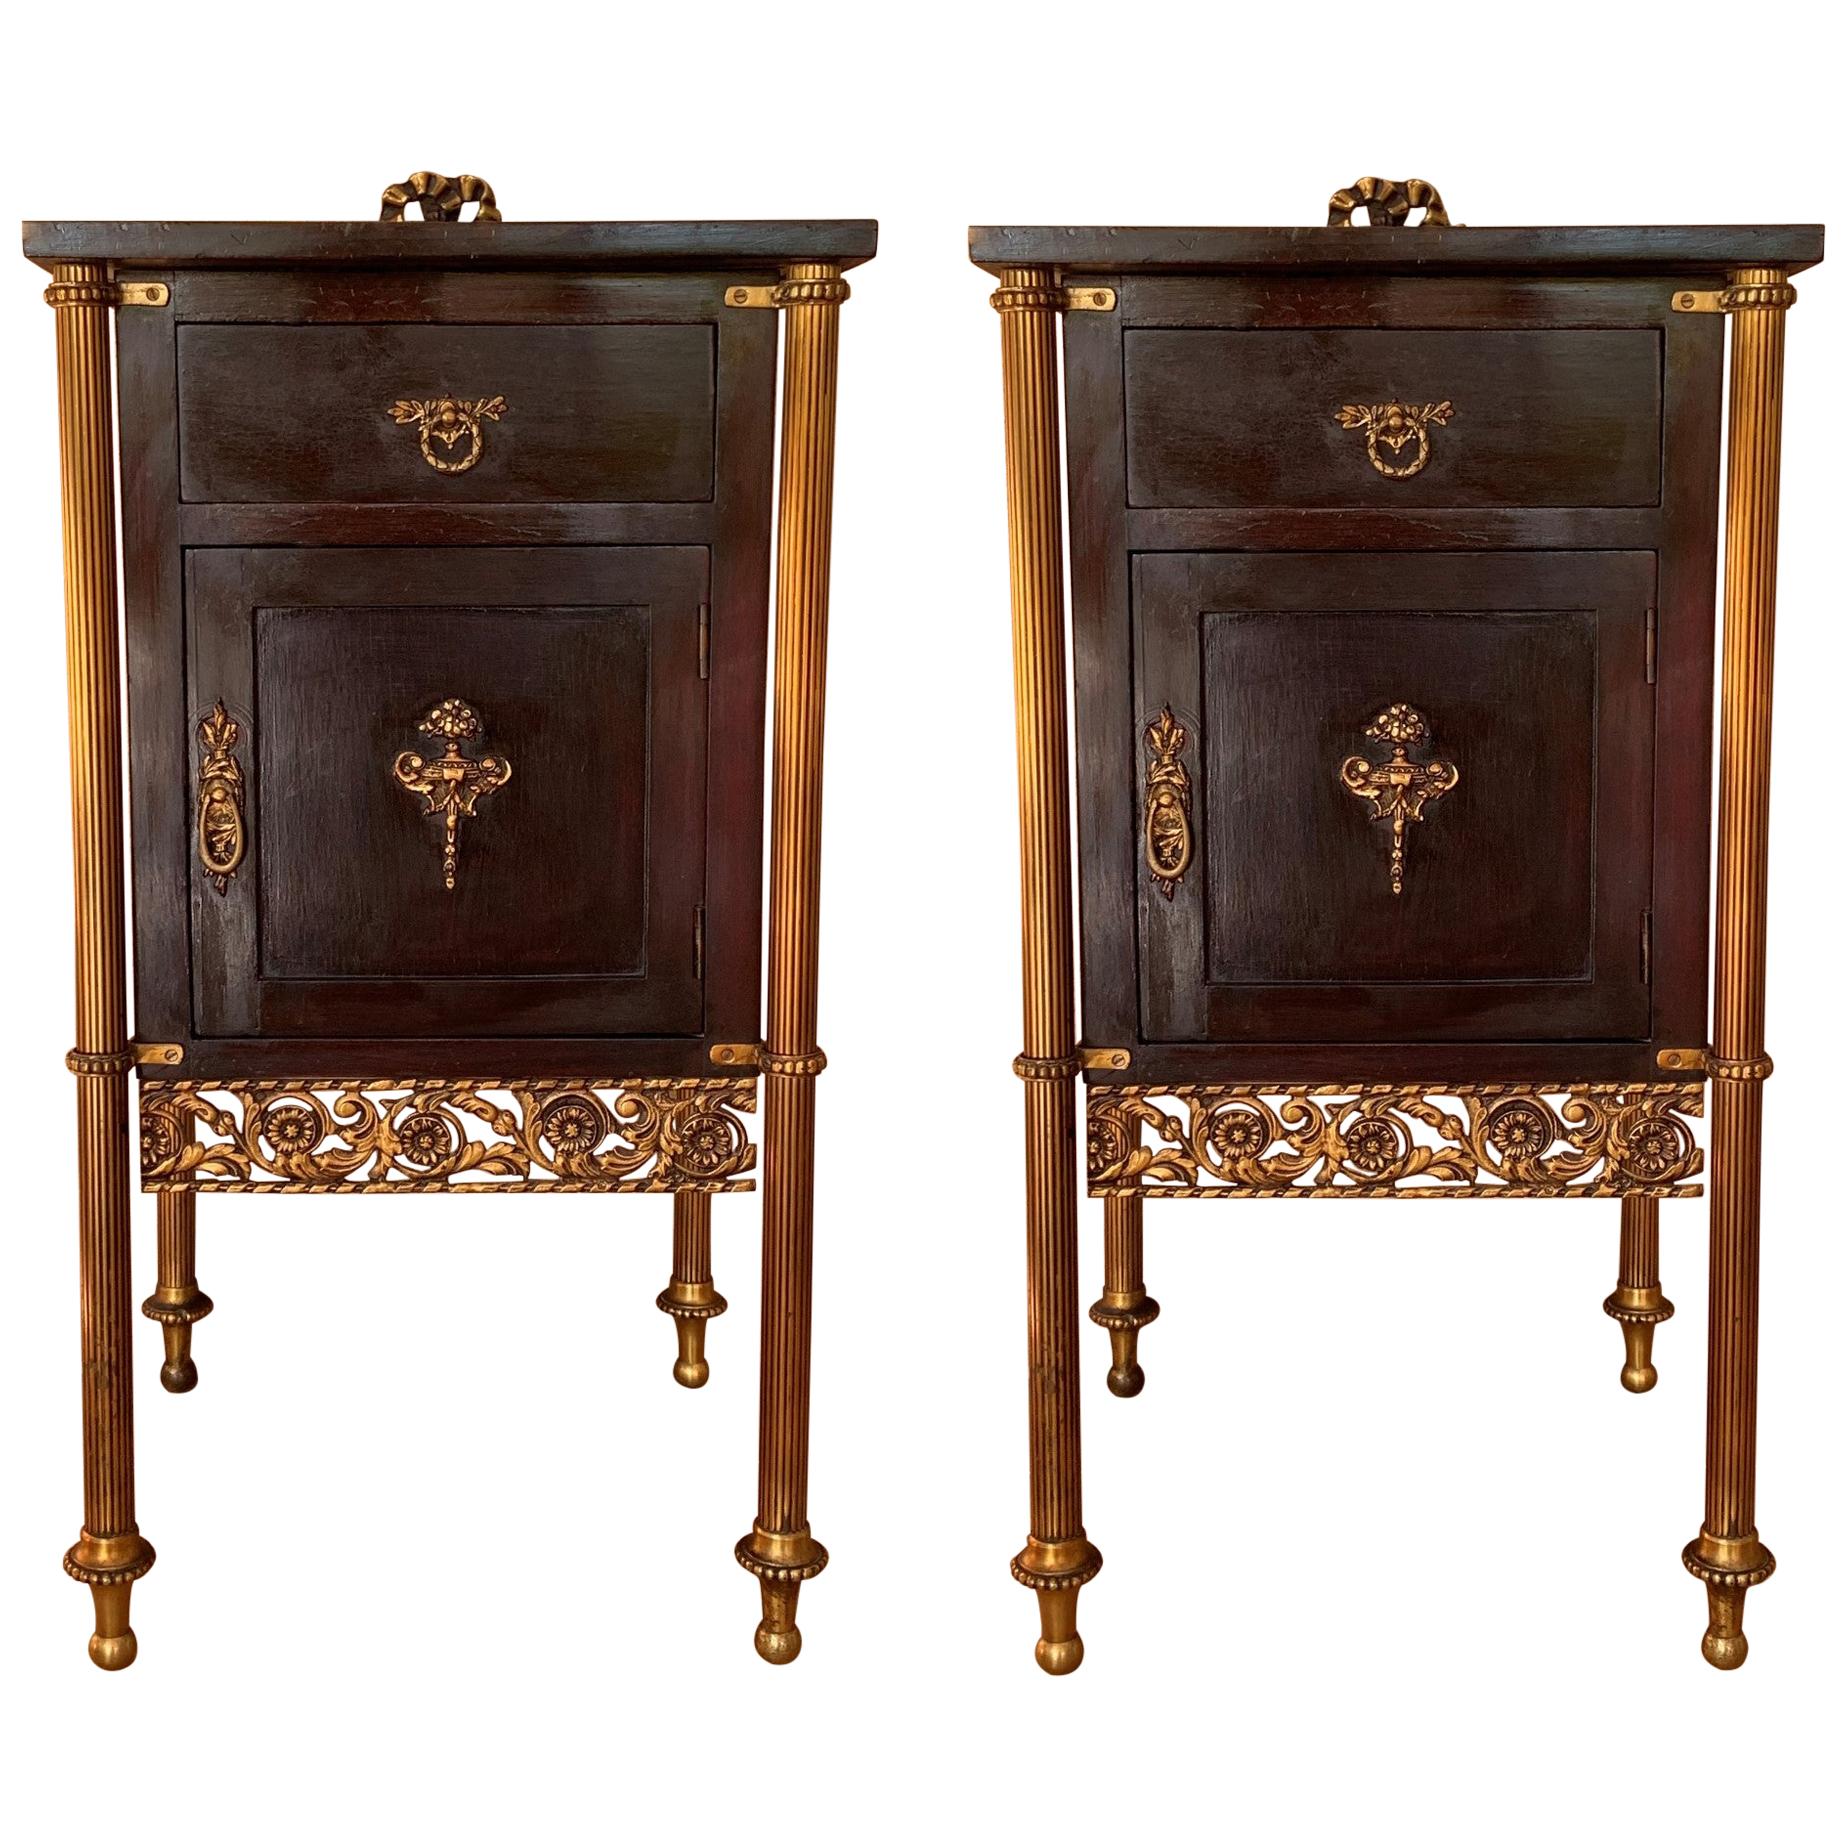 Pair of French Ebonized Mahogany Nightstands with Fluted Bronze Columns